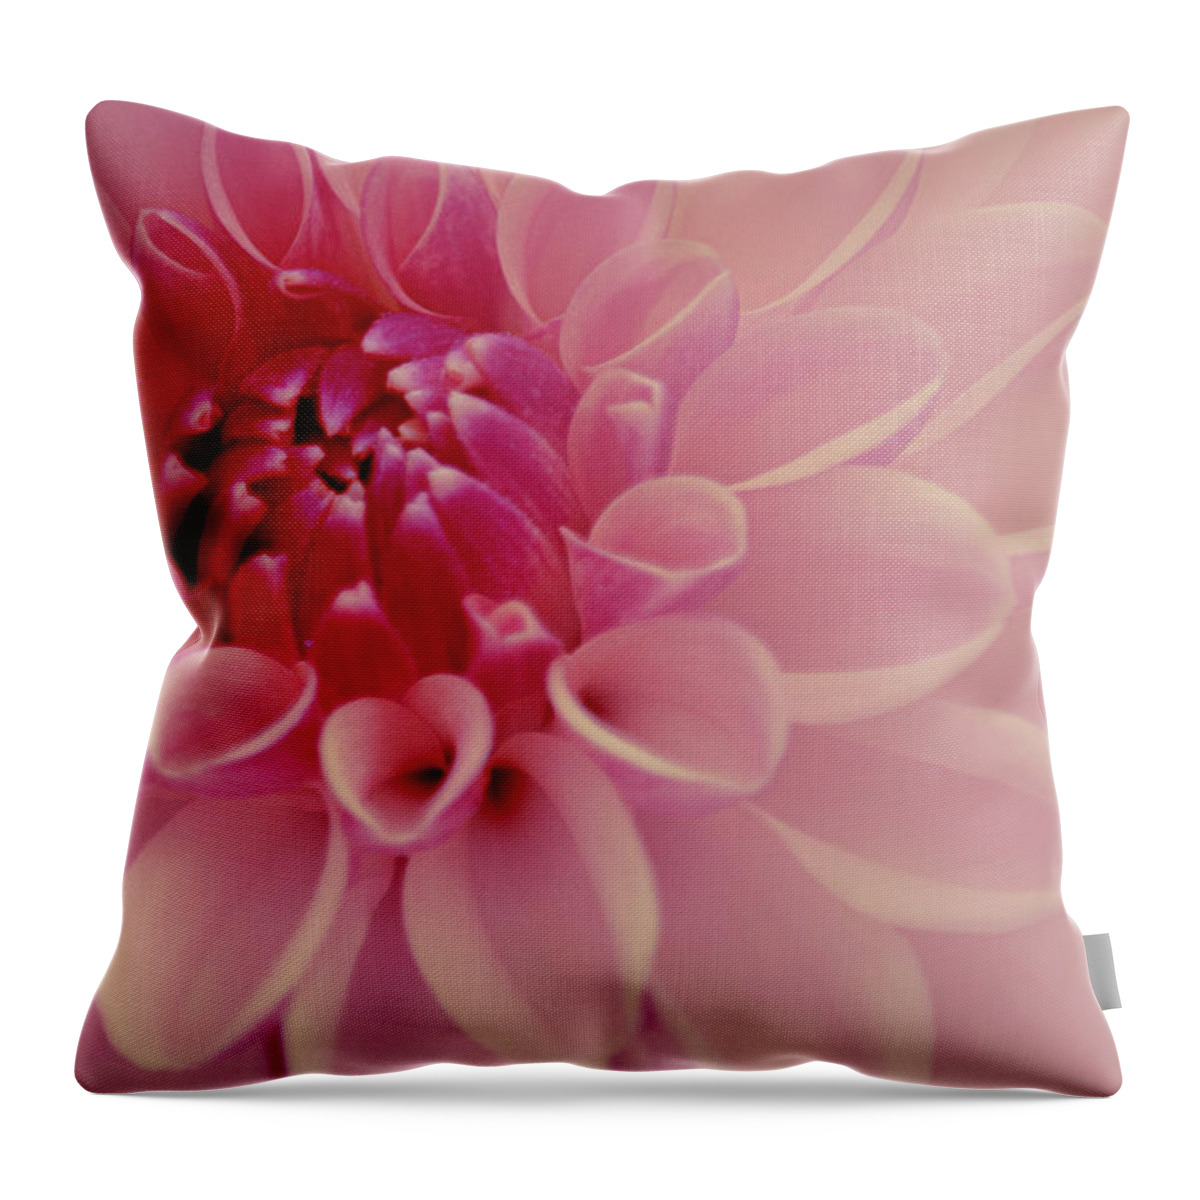 Art Throw Pillow featuring the photograph Pale Pink Dahlia by Joan Han